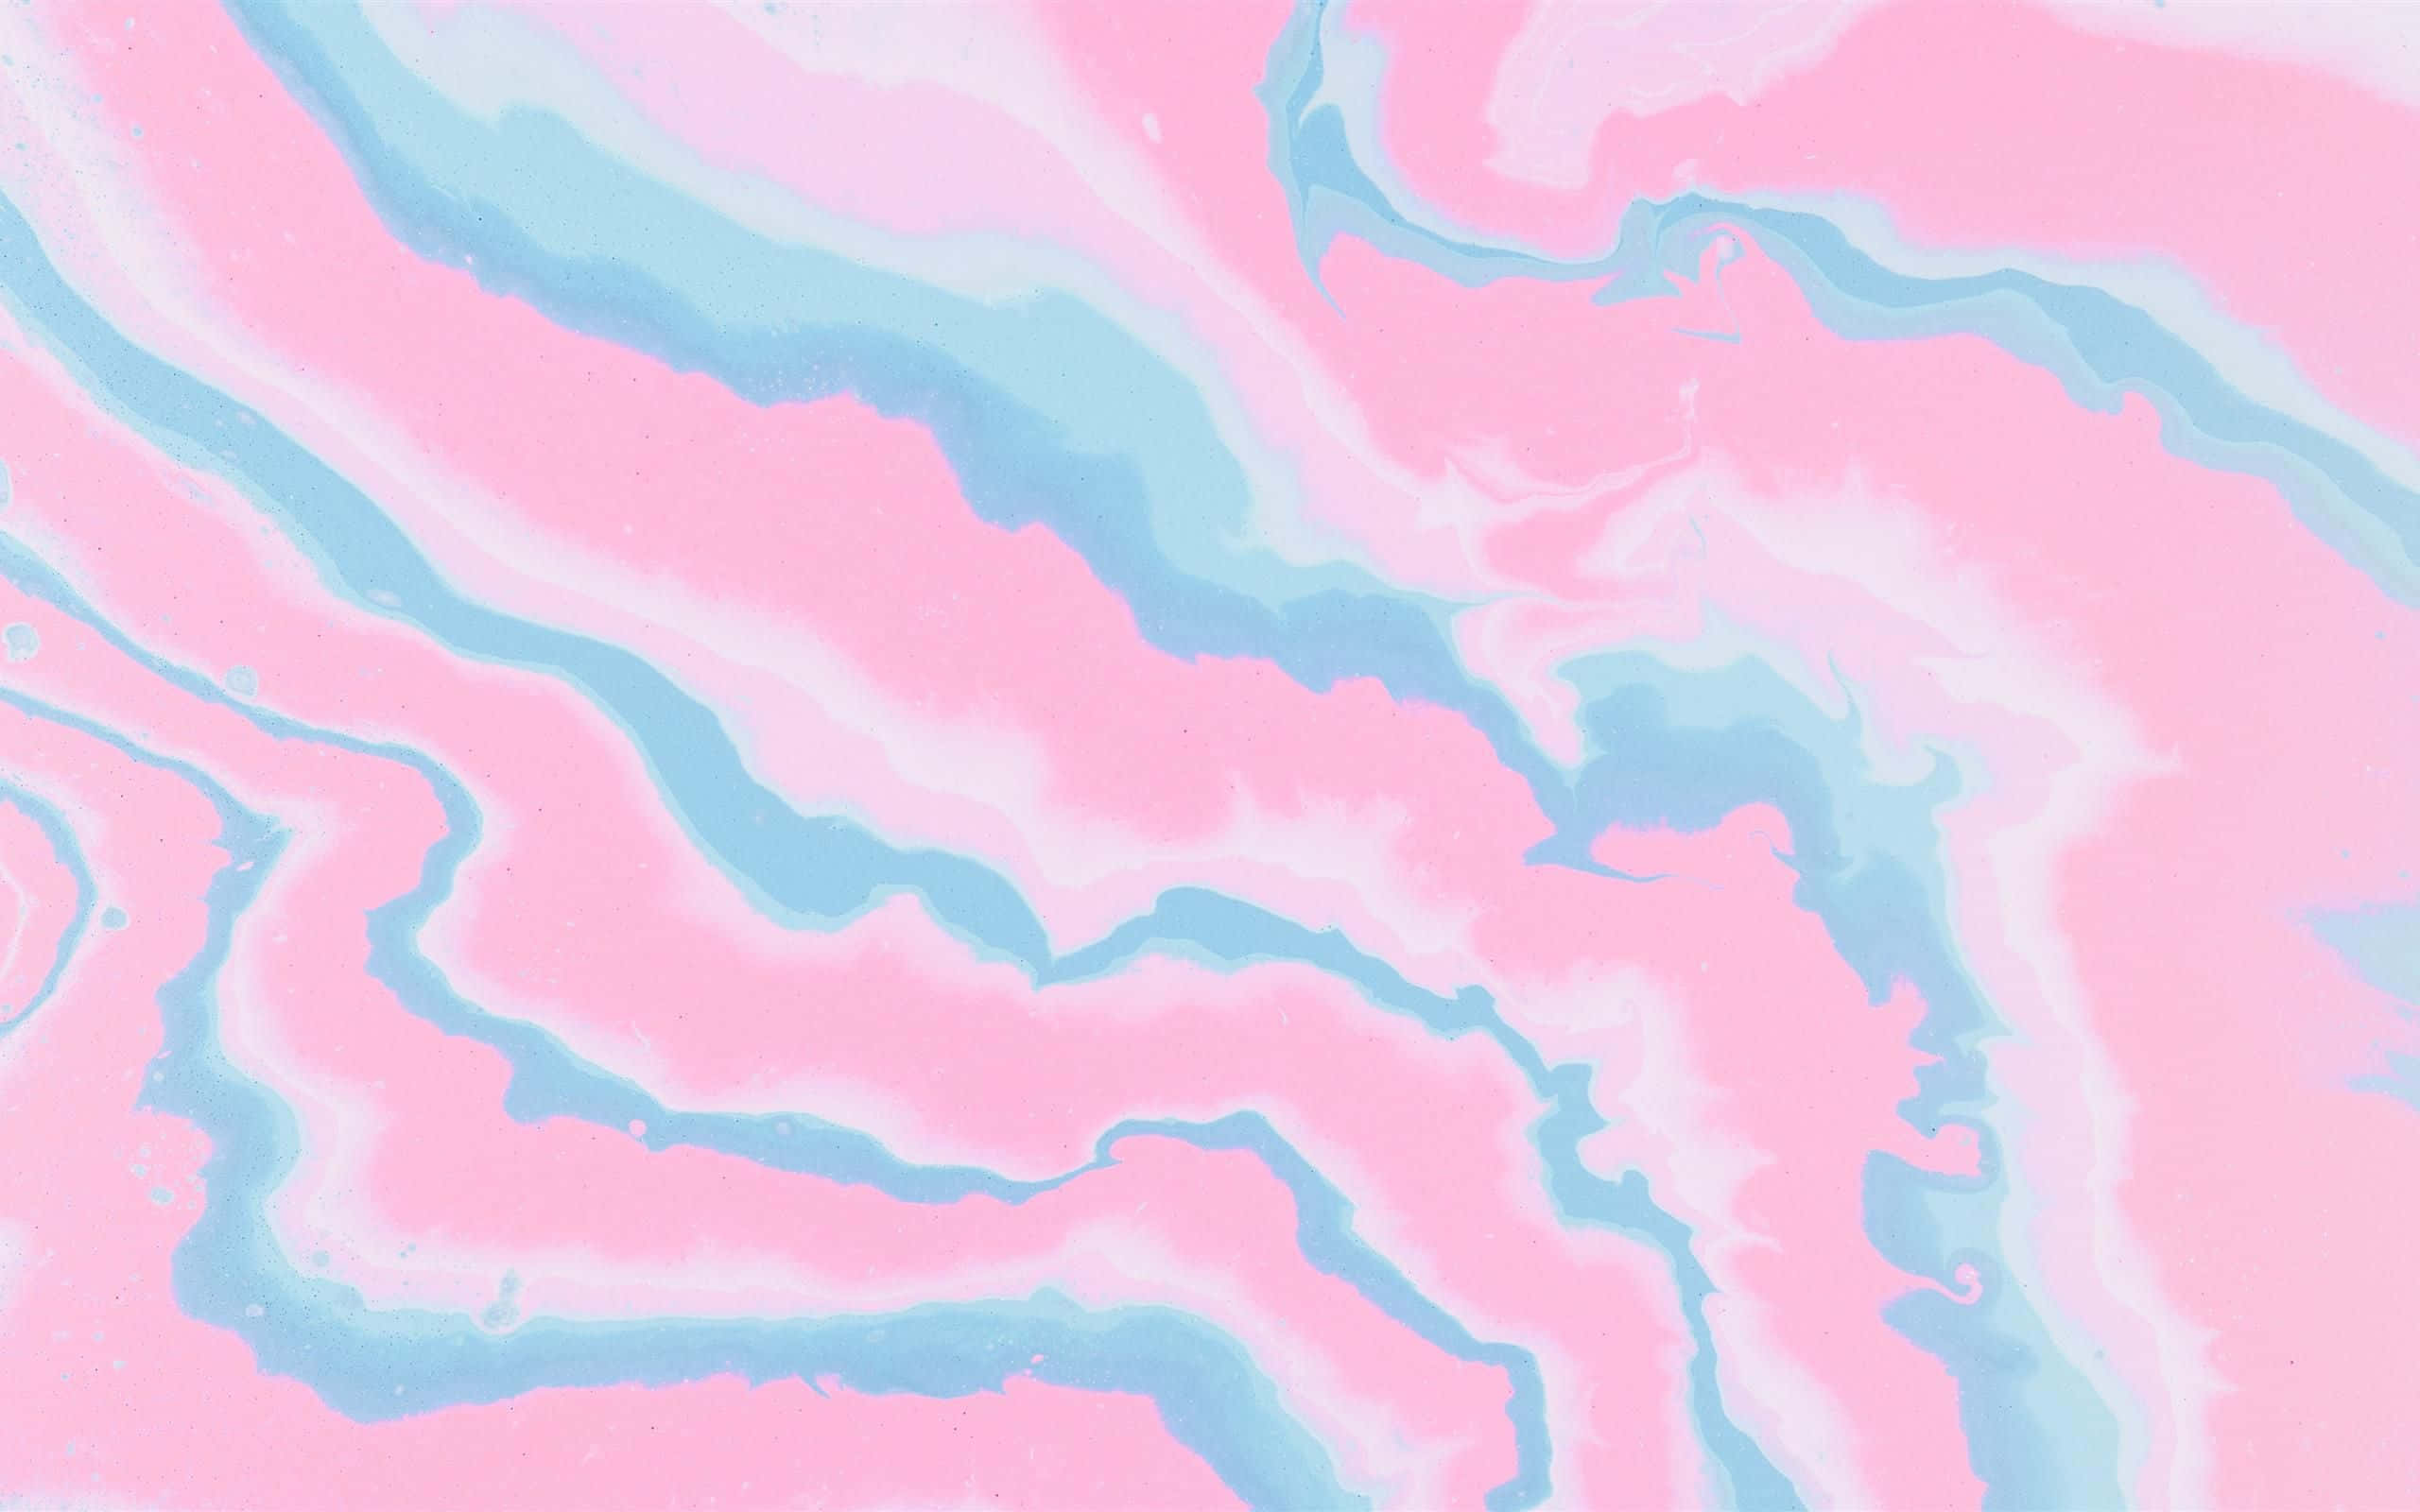 Vibrant Pink and Blue Gradient Background